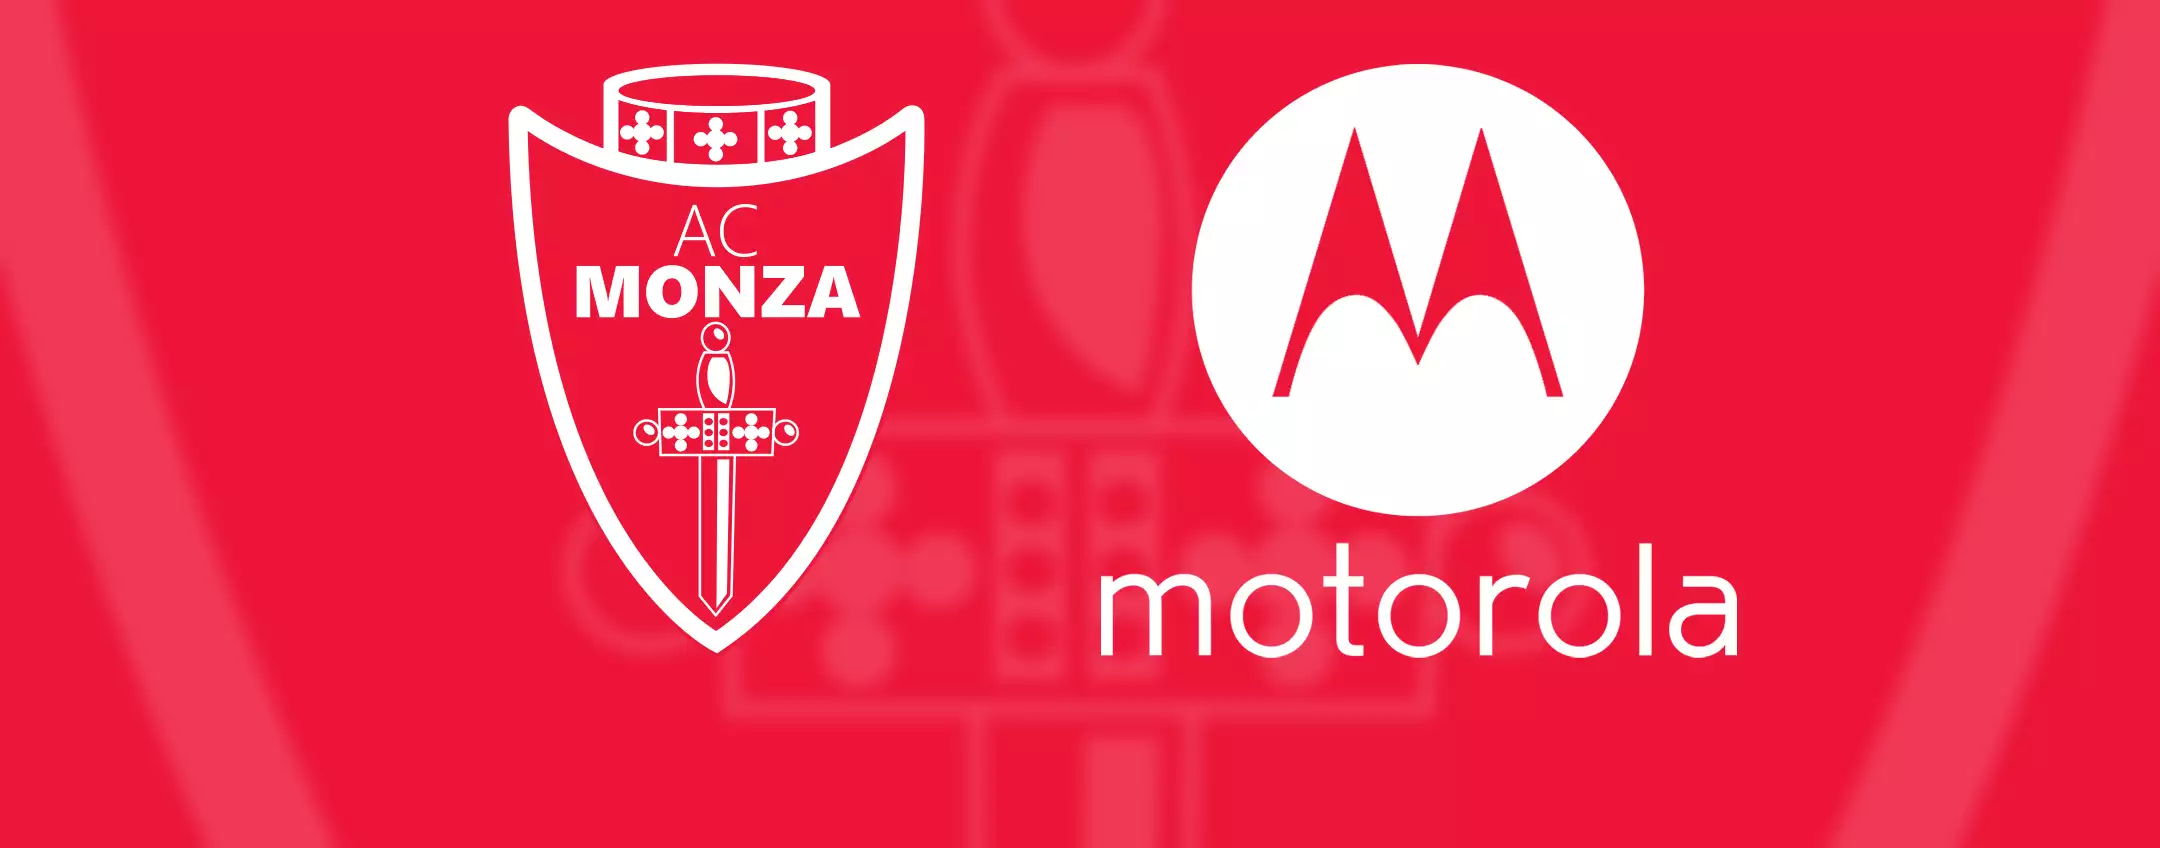 Motorola: here is the new partnership with AC Monza